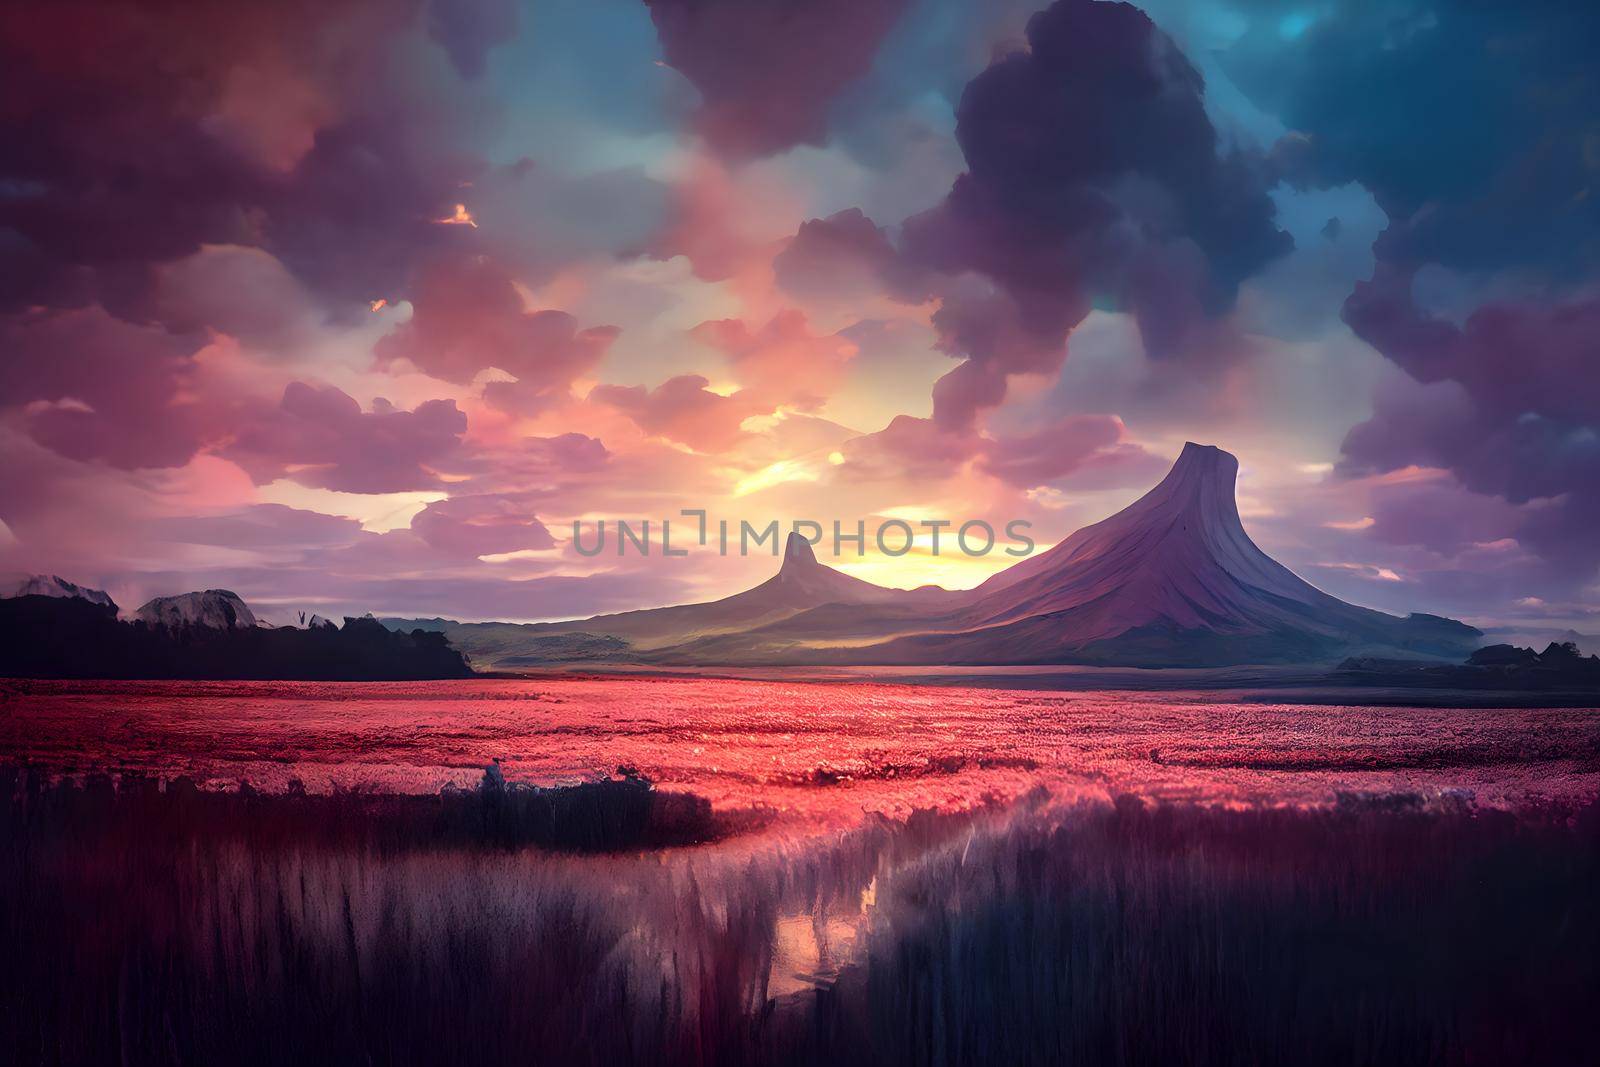 dreamy anime style summer wilderness landscape with mesa mountains , neural network generated art by z1b